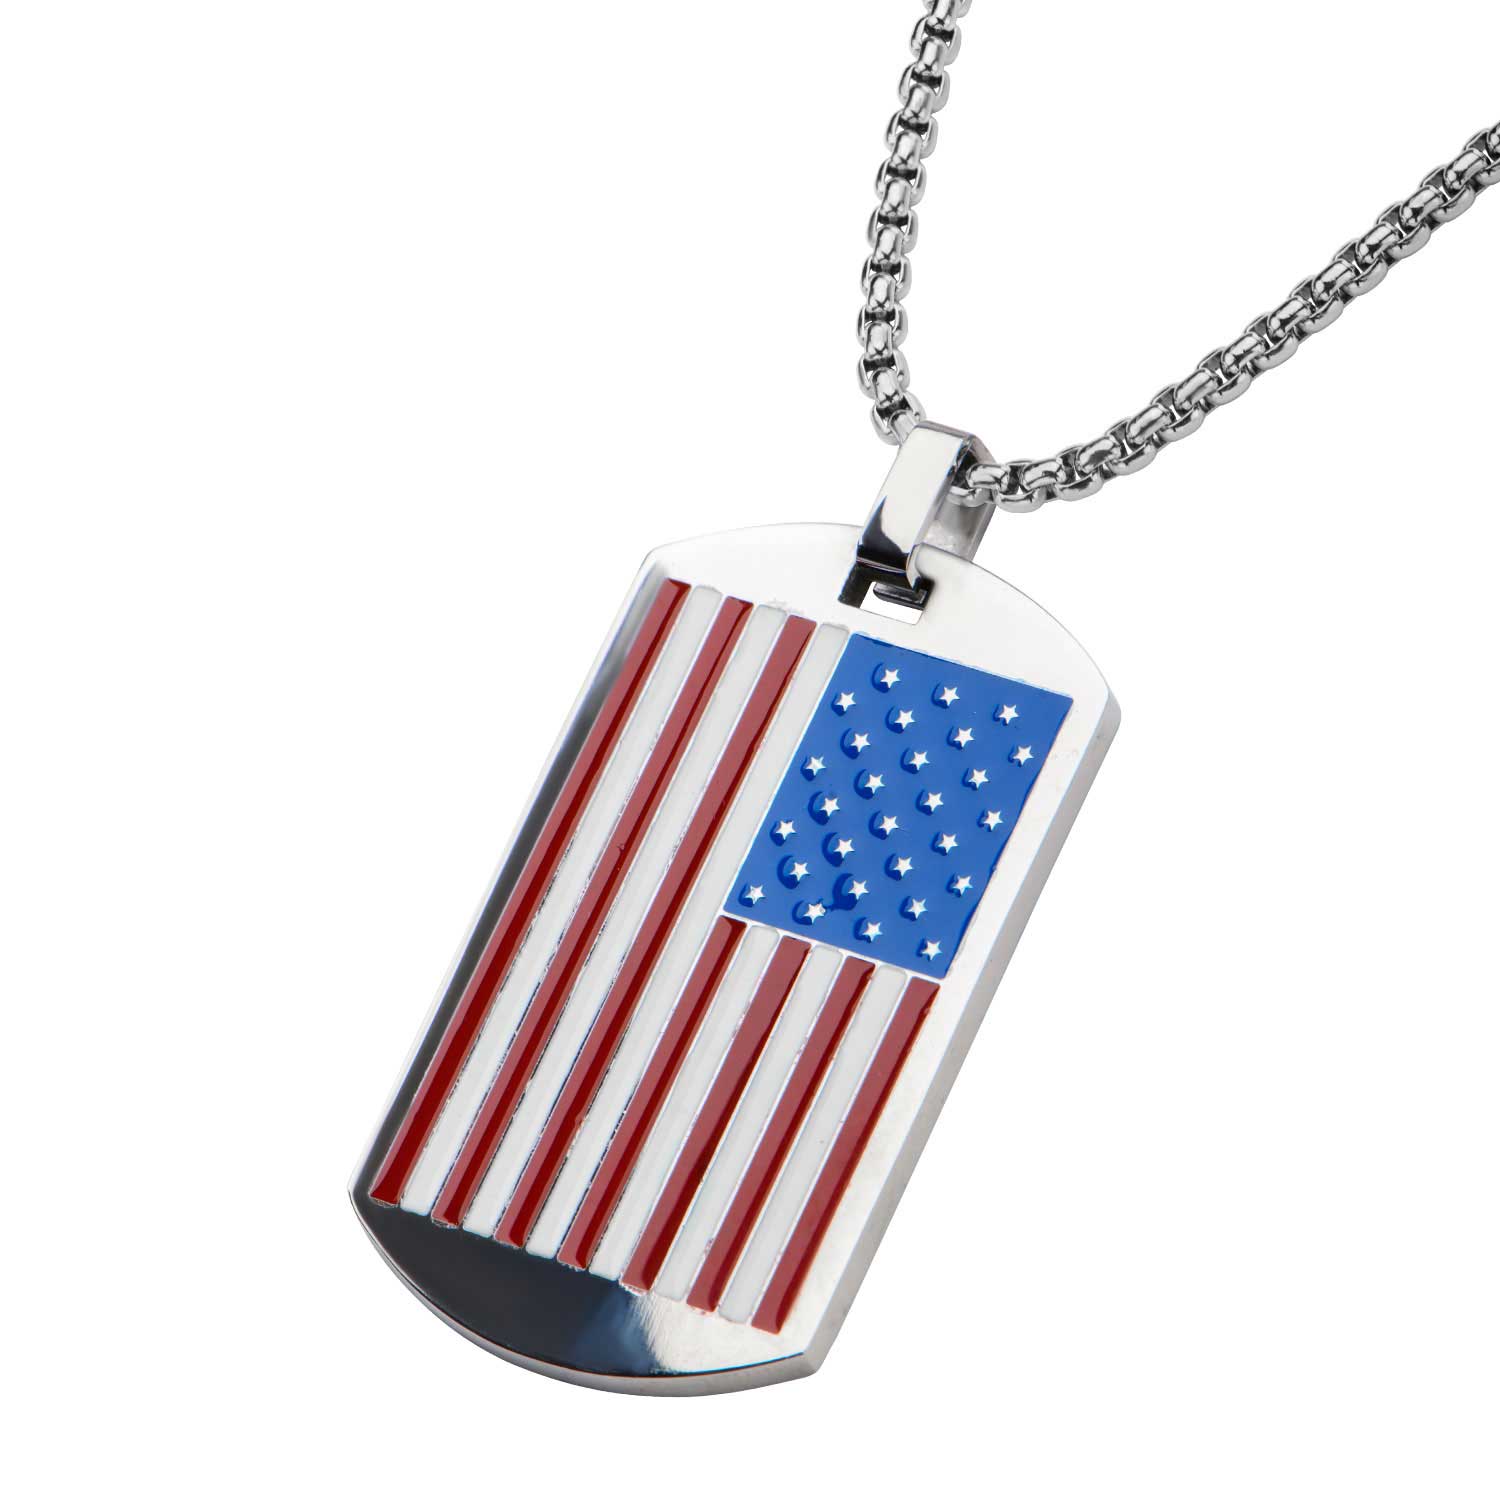 Men's Stainless Steel American Flag Enamel Dog Tag Pendant with Chain 